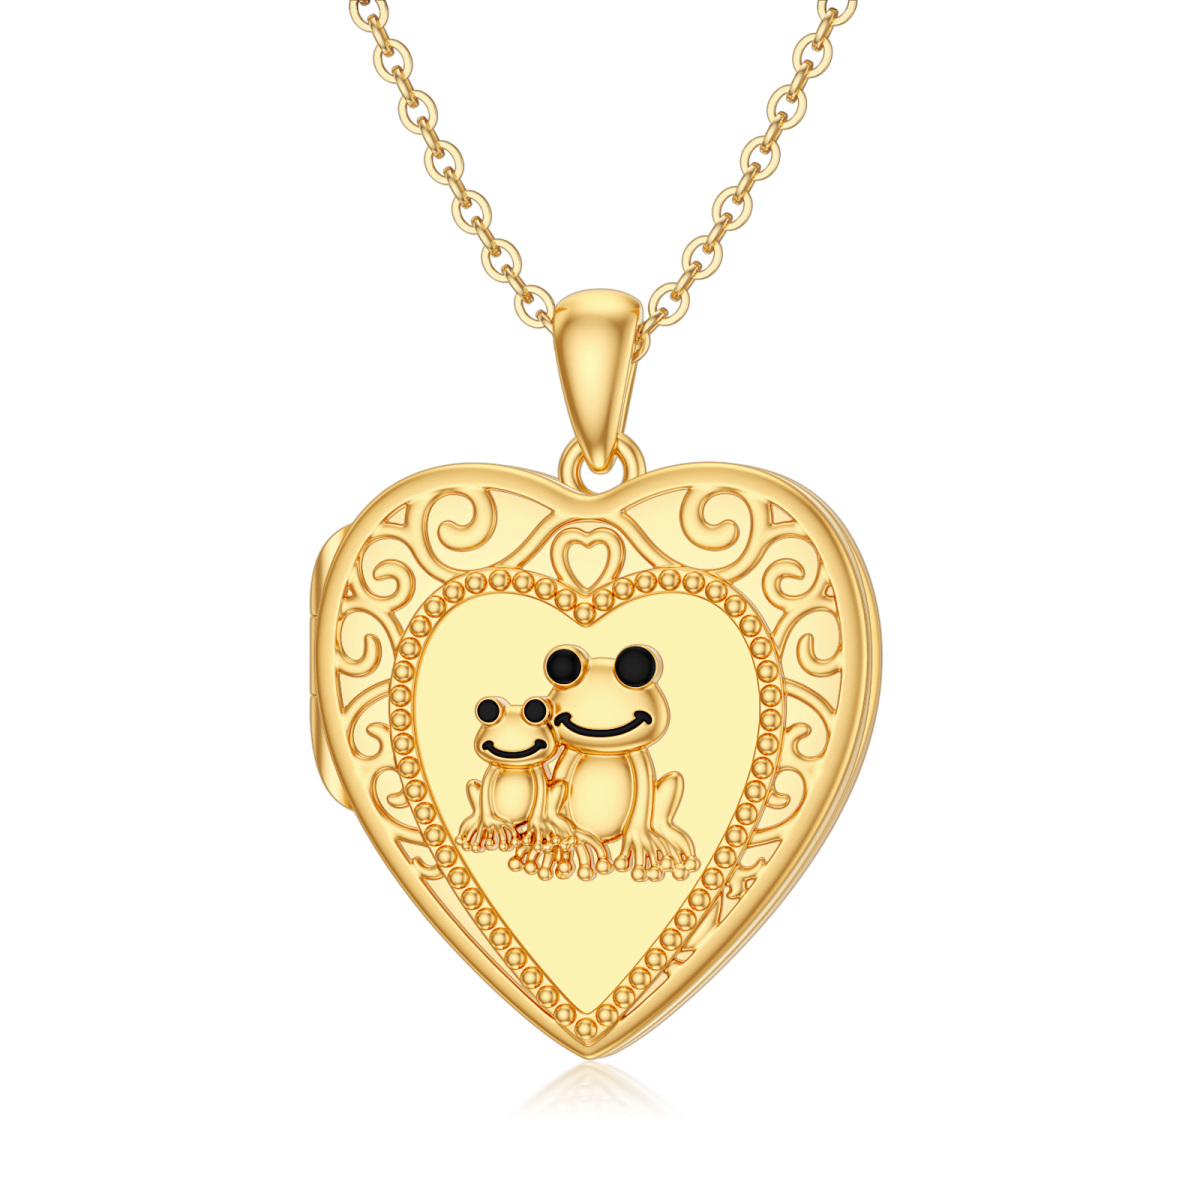 10K Gold Frog Heart Personalized Engraving Photo Pendant Necklace-1